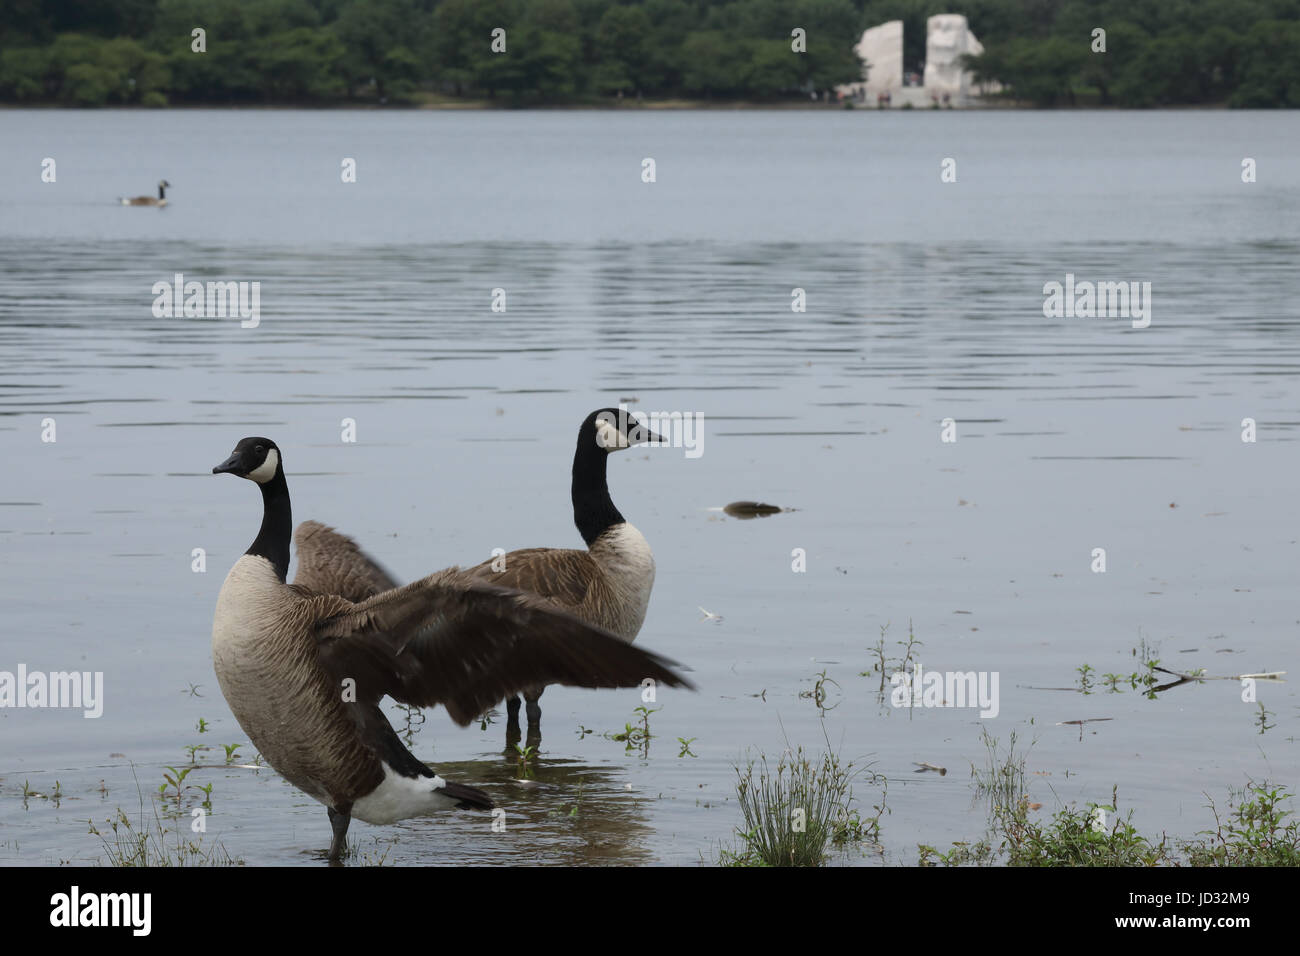 Canada geese, Branta canadensis, Washington D.C. ,with Martin Luther King Jr. monumenet in the background Stock Photo